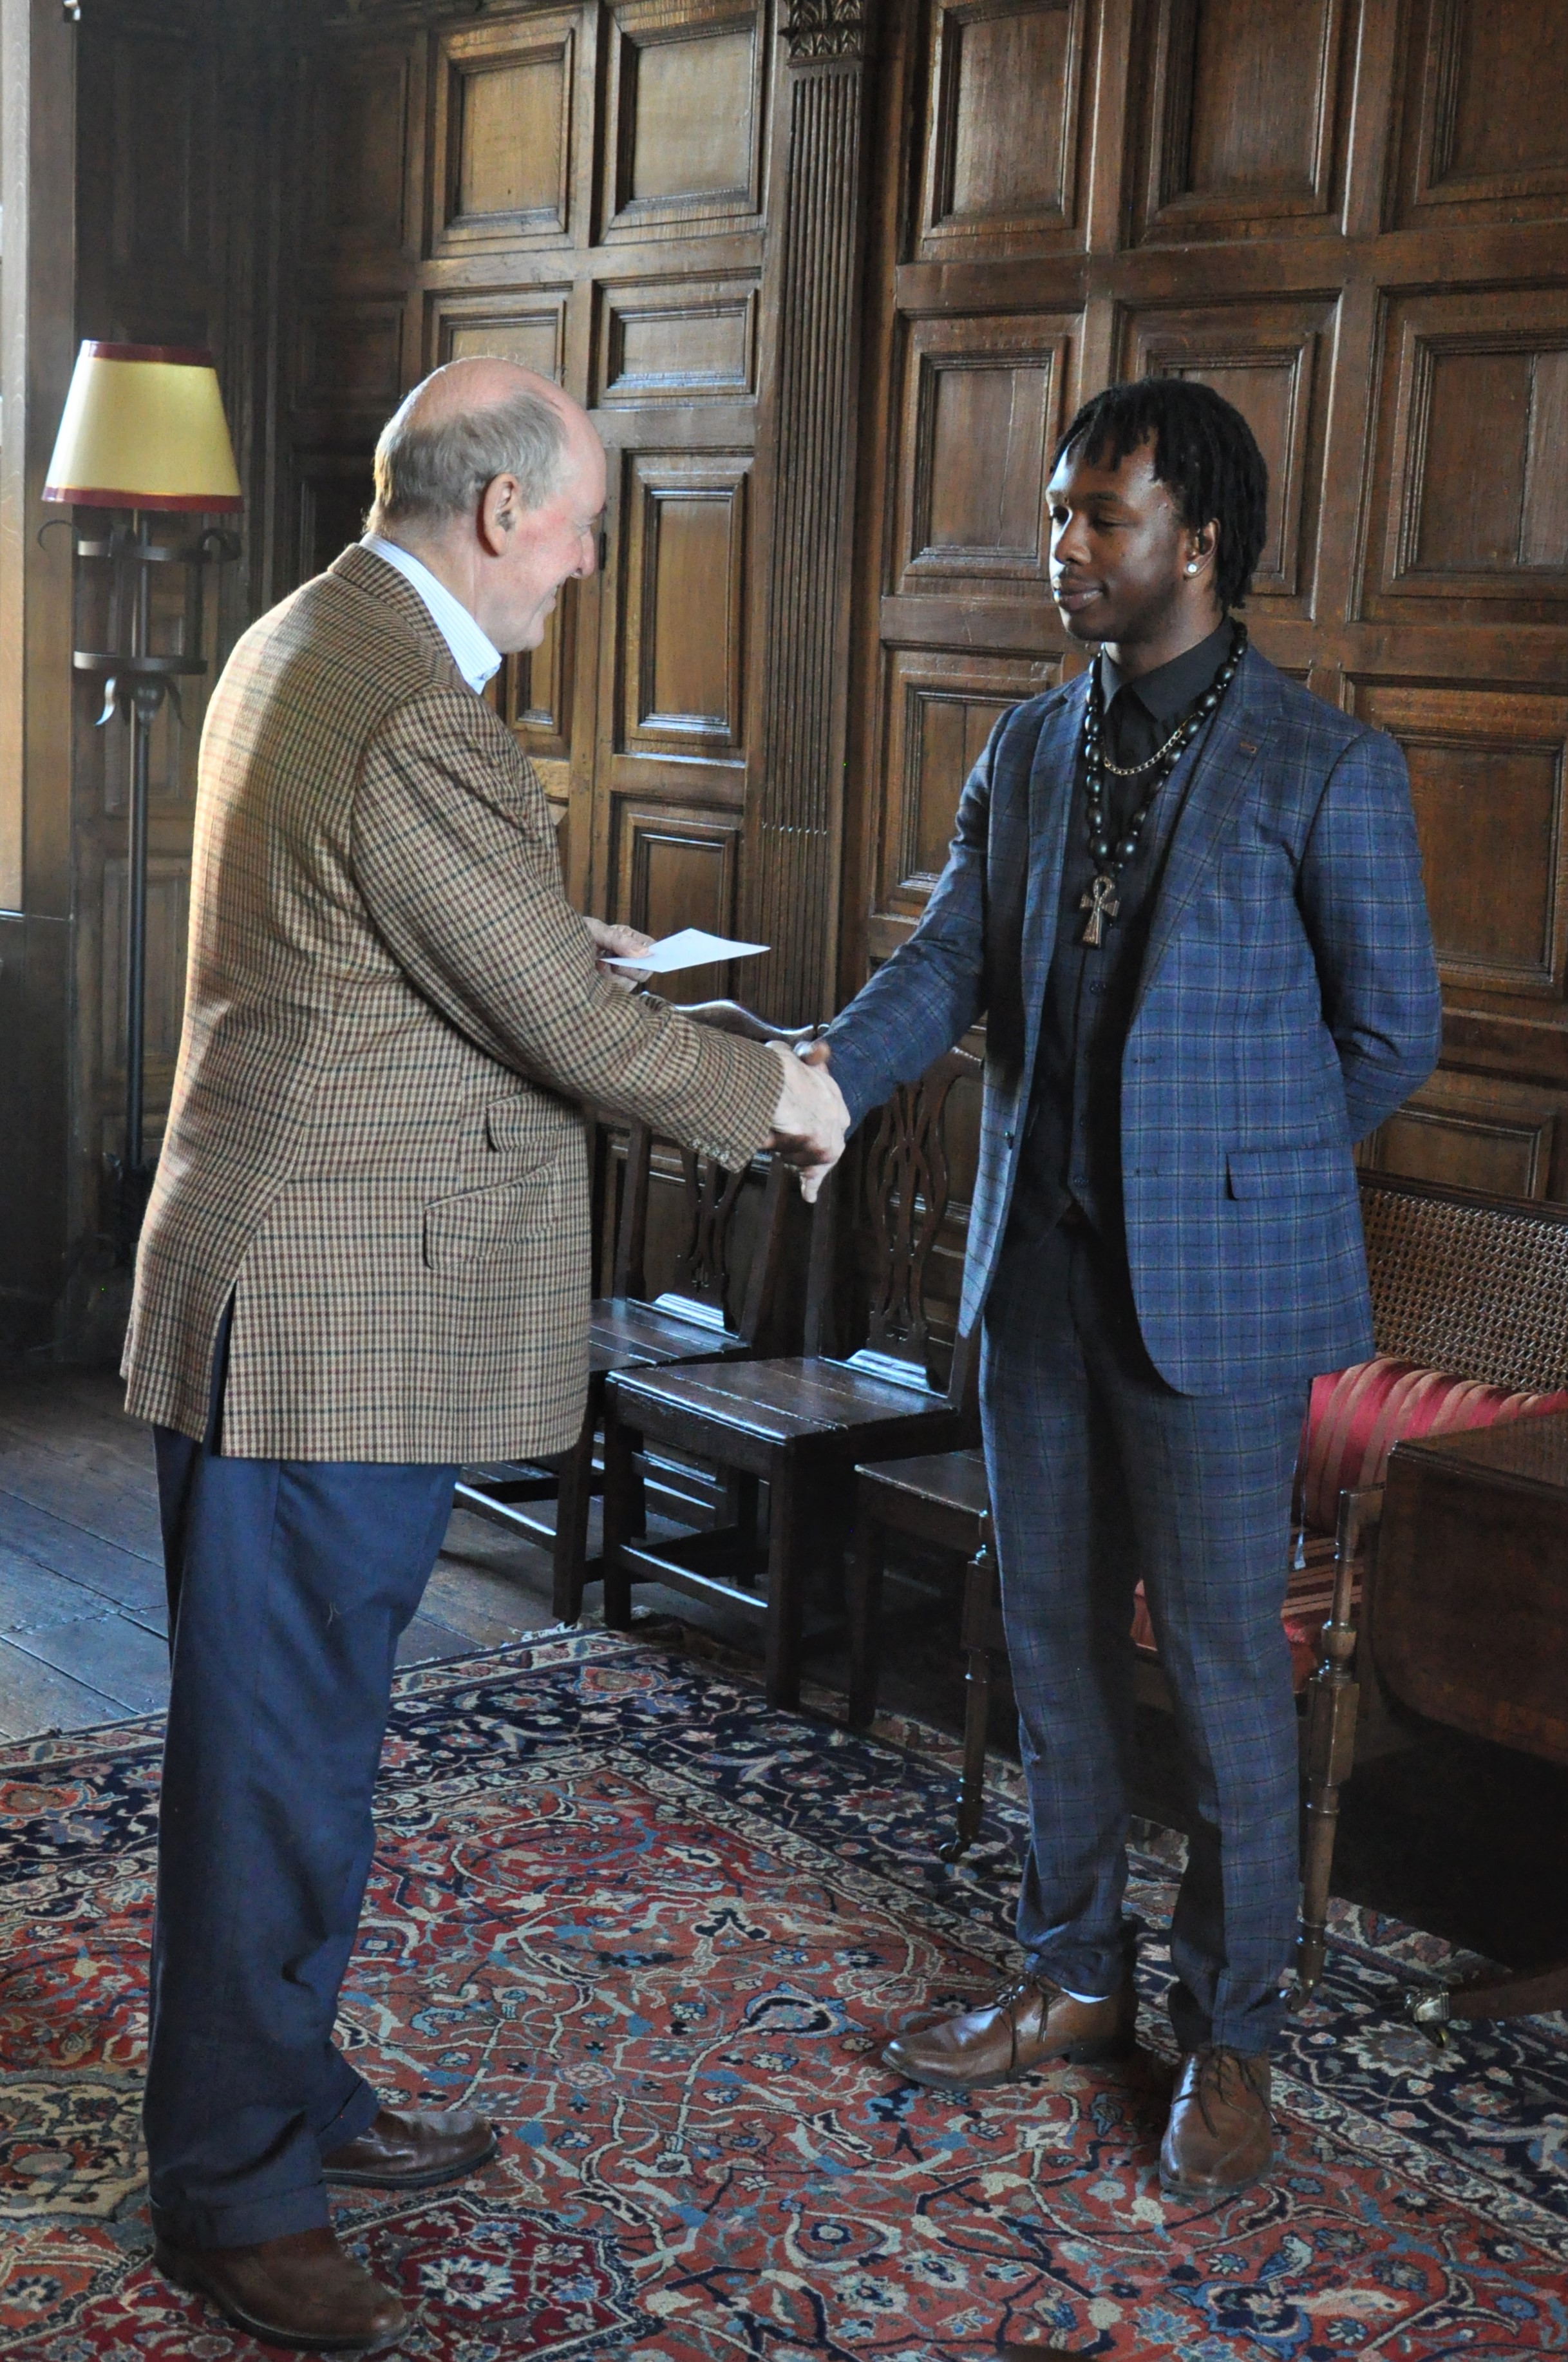 Kofi receiving his prize from the Warden